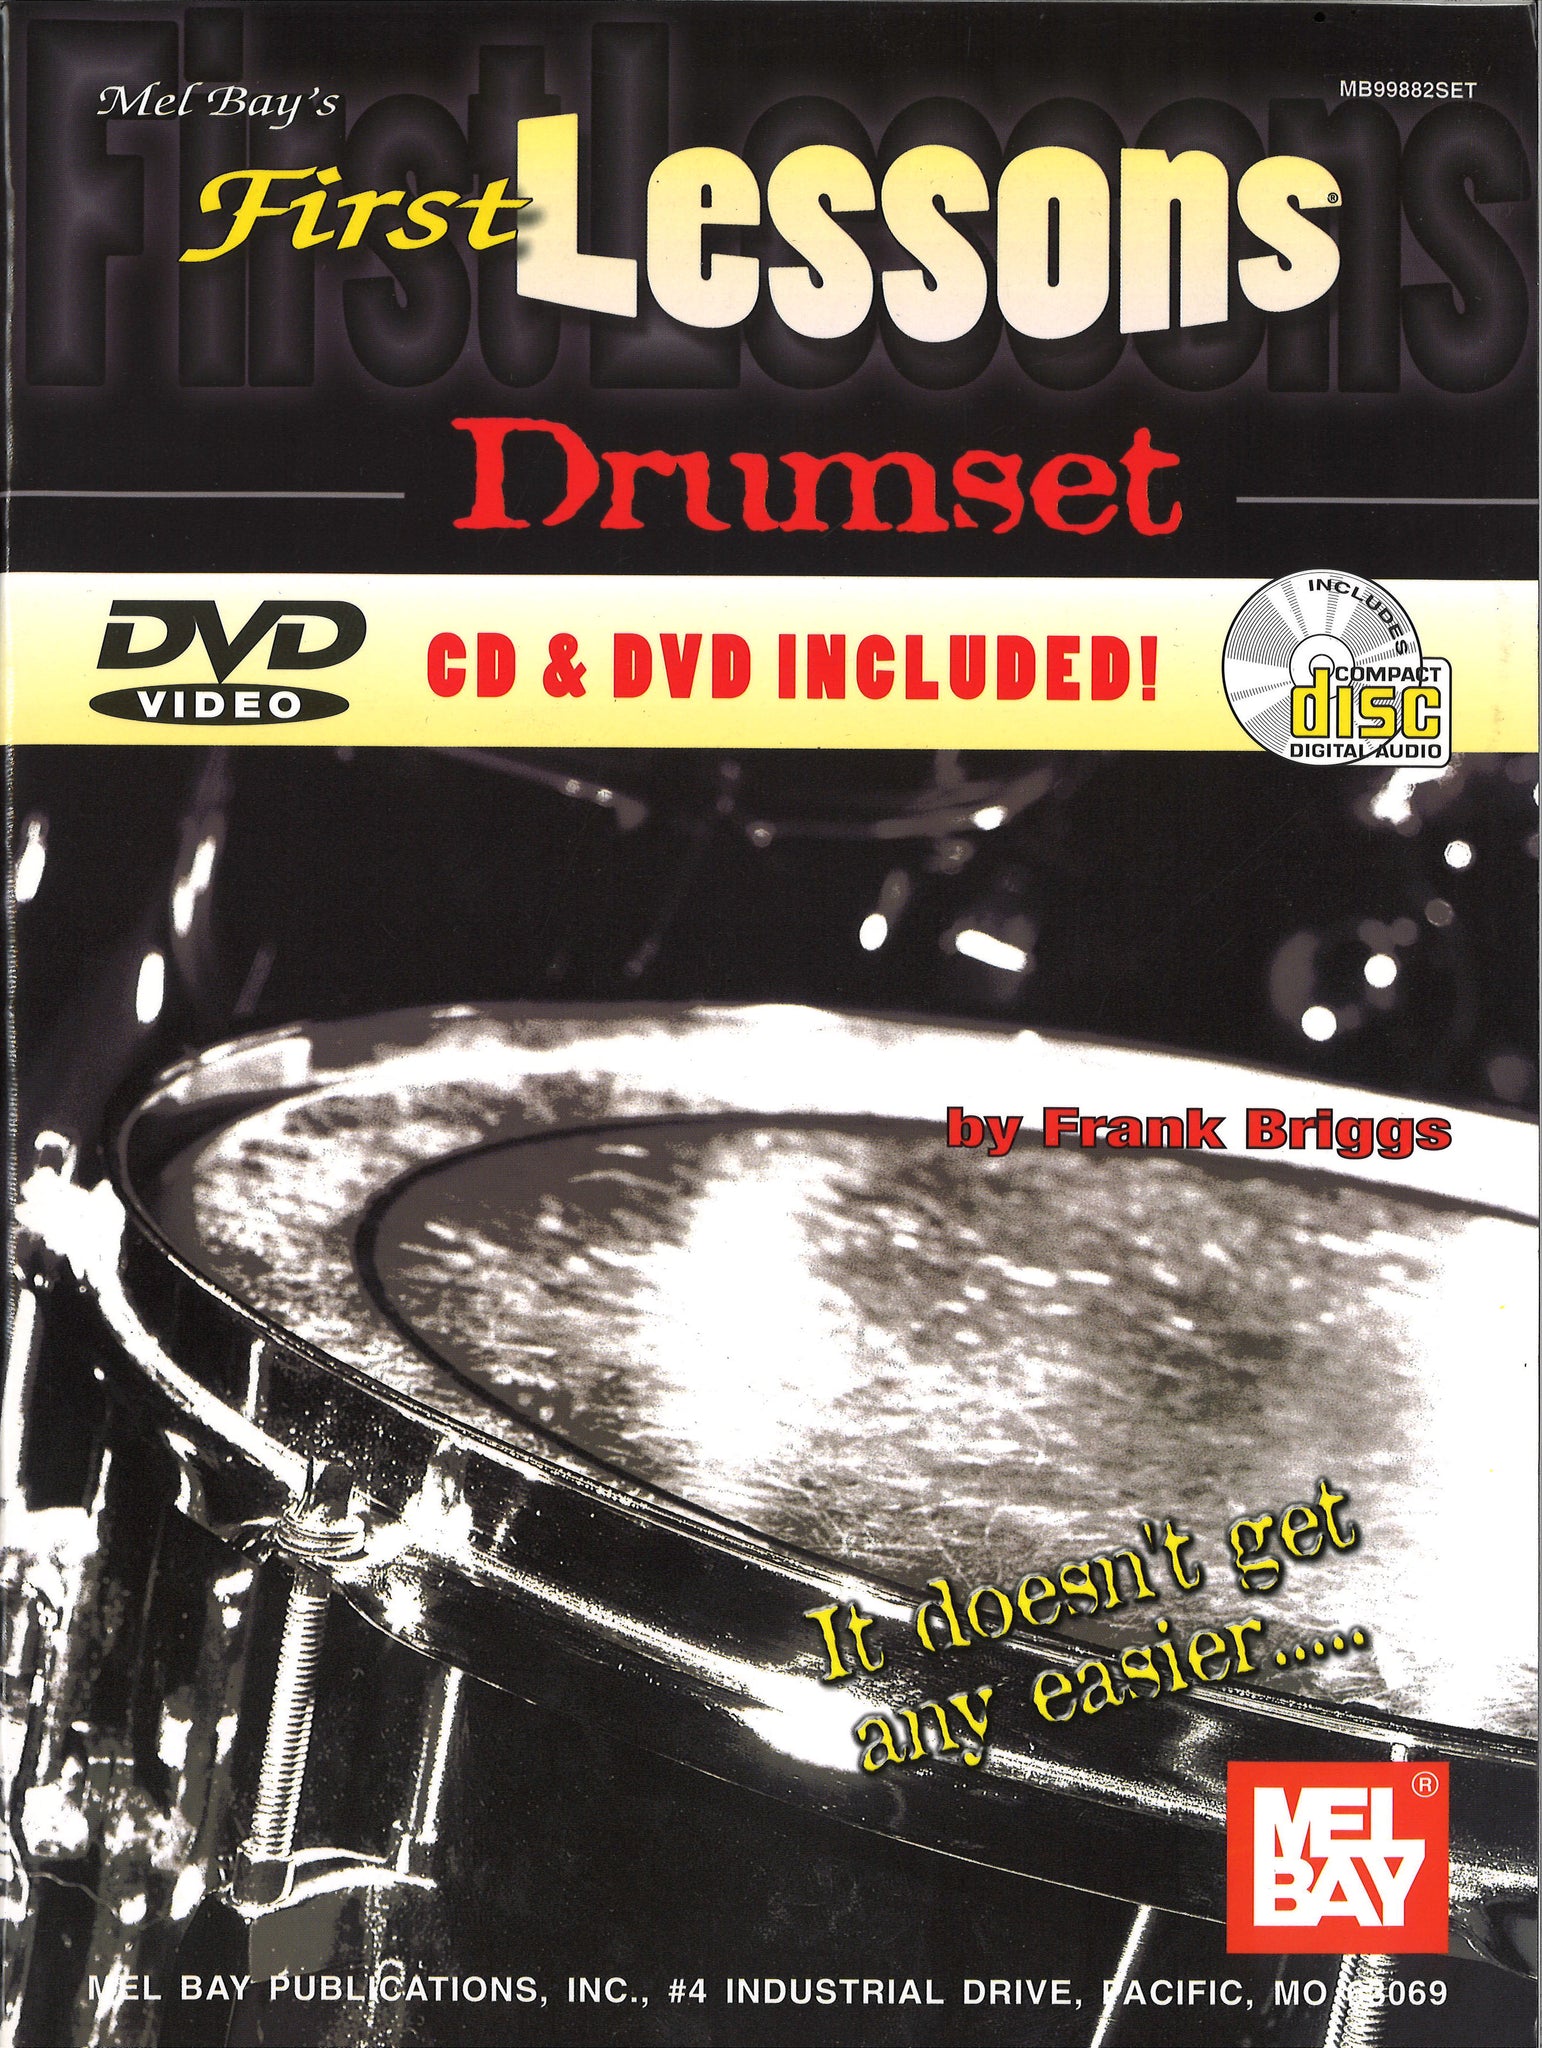 Mel Bay First Lessons Drumset (Book with CD & DVD)